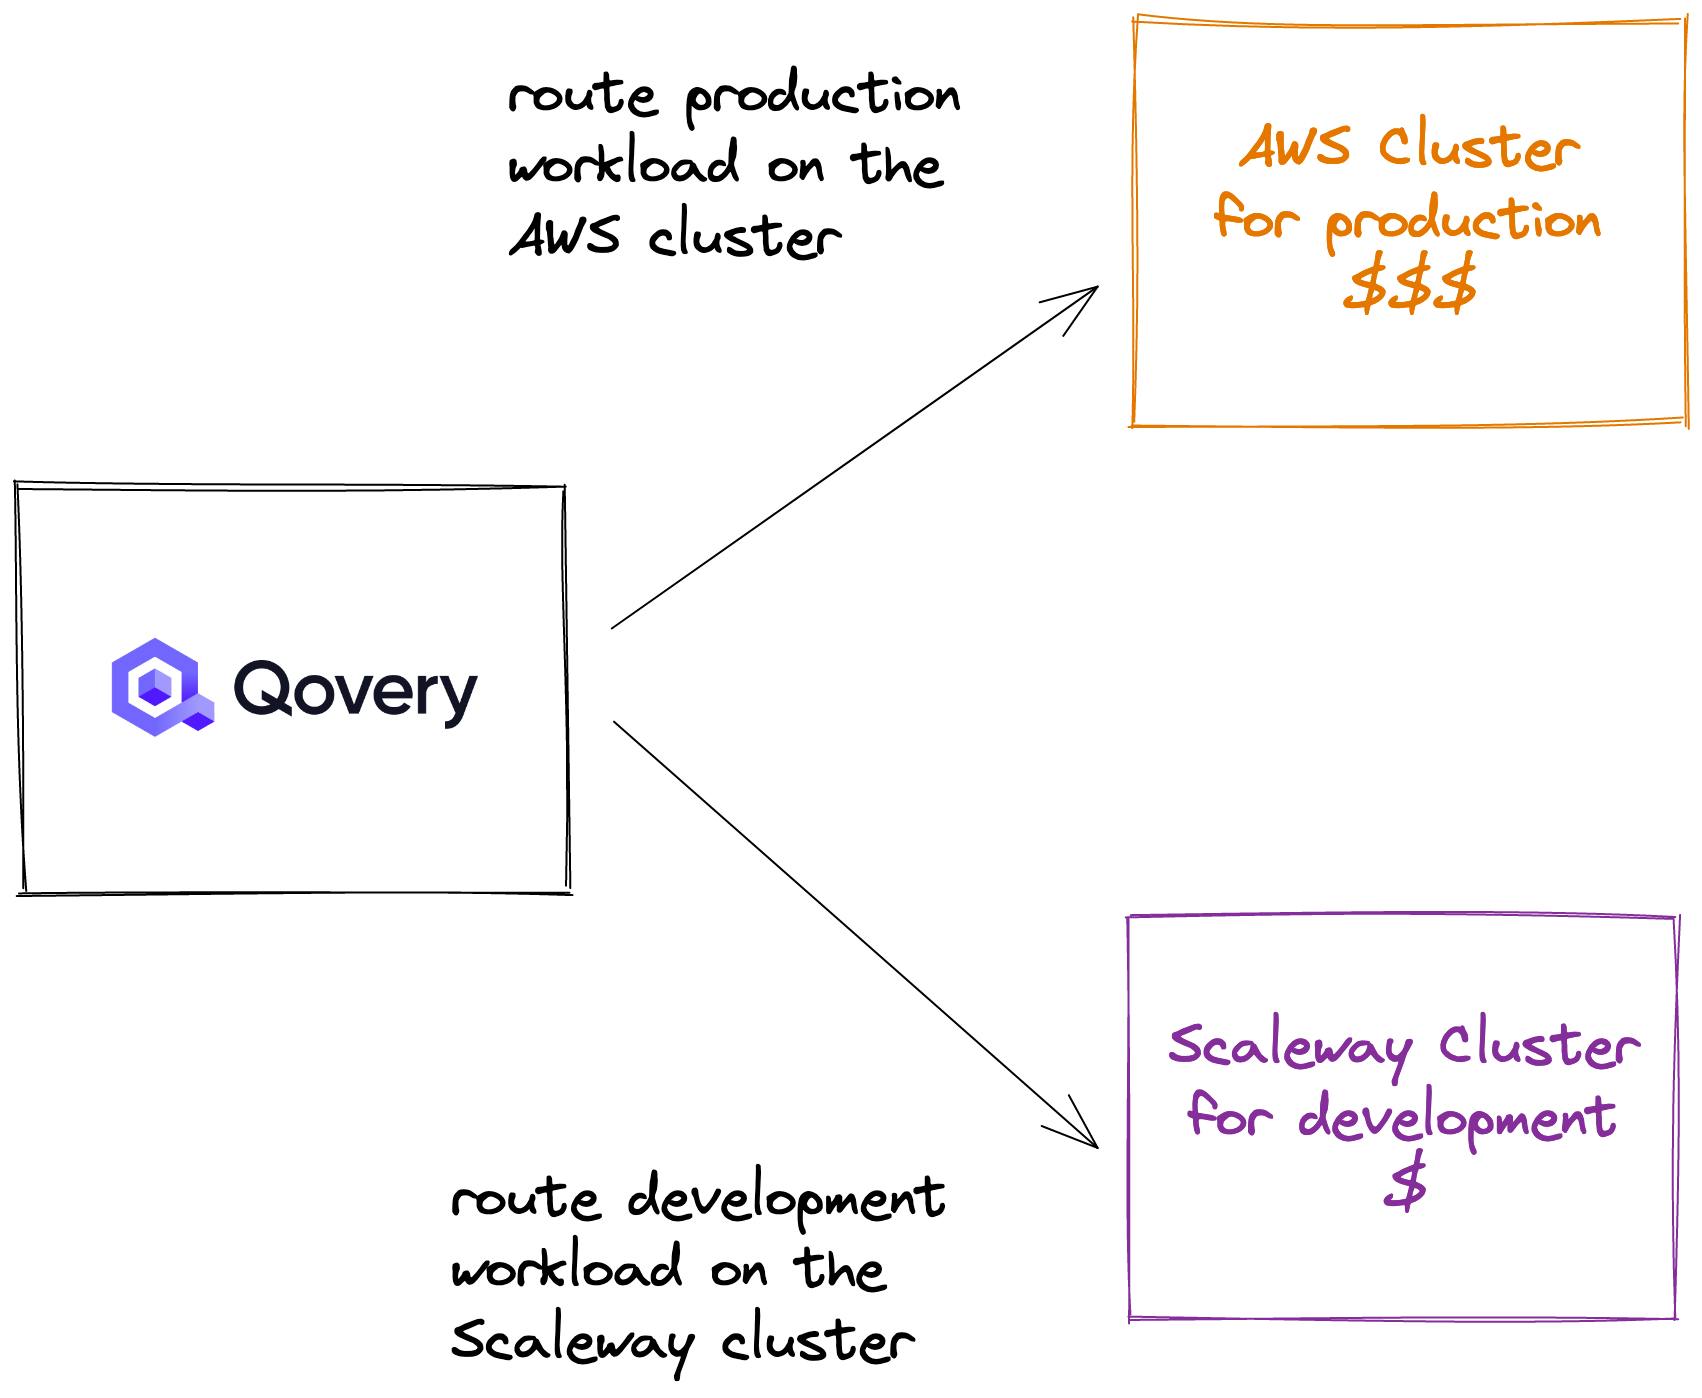 Here is an example where the production workload runs is routed to an AWS cluster, and the development workload routed to a cheapest cluster